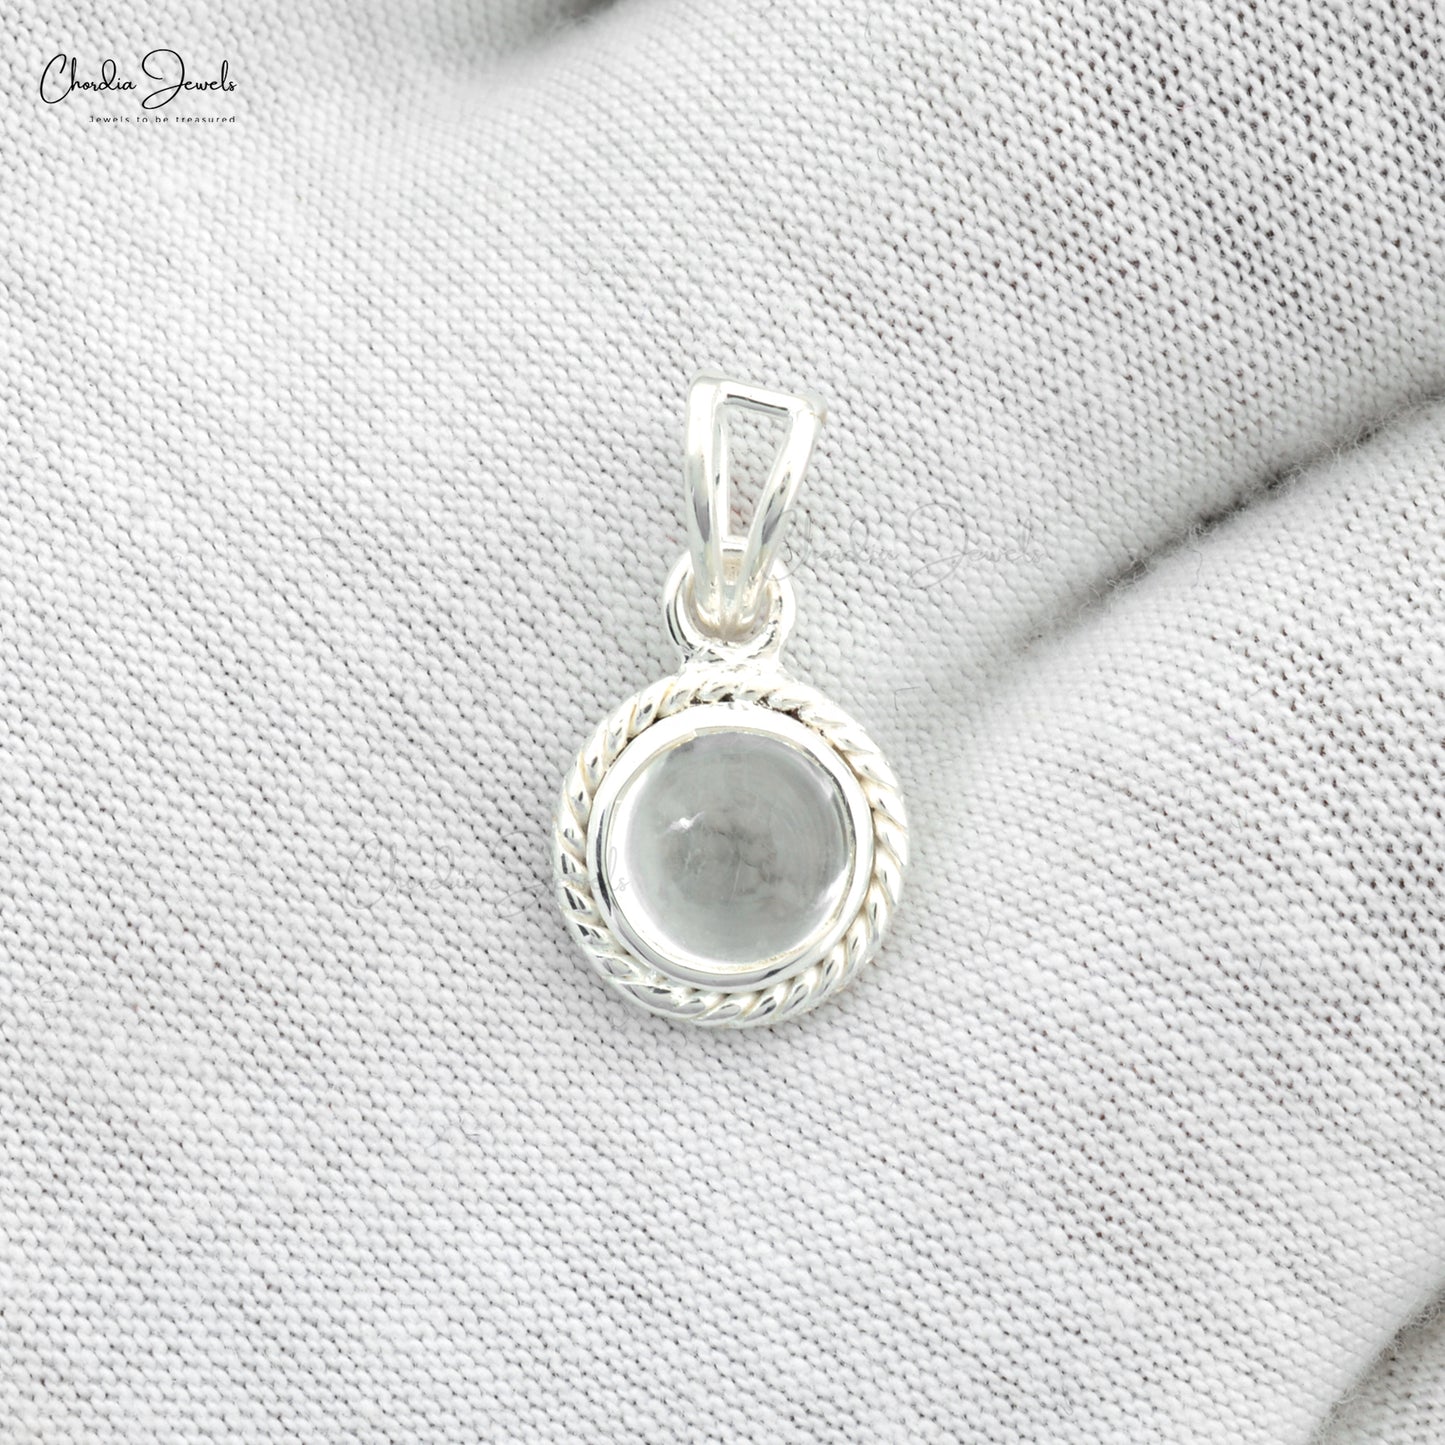 Load image into Gallery viewer, Genuine White Topaz Gemstone Pendant 925 Sterling Silver Pendant Necklace For Women Handmade Gemstone Jewelry At Discount Price
